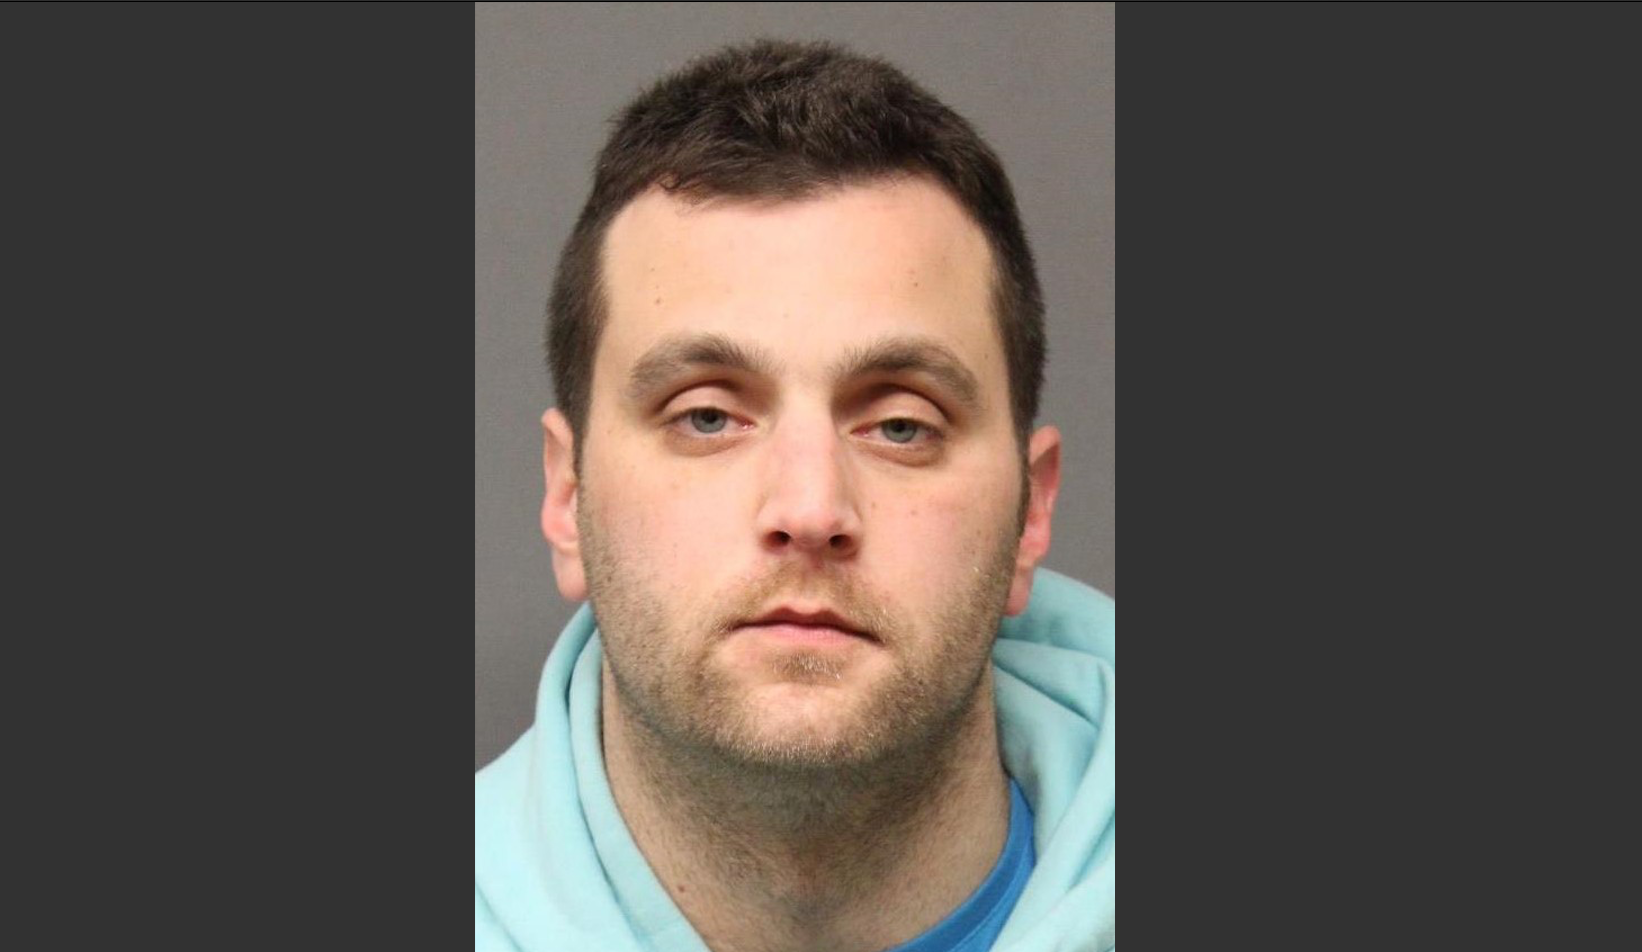 Township man adds child porn to his list of charges over meth, Xanax, GHB — Pascack Press and Northern Valley Press pic